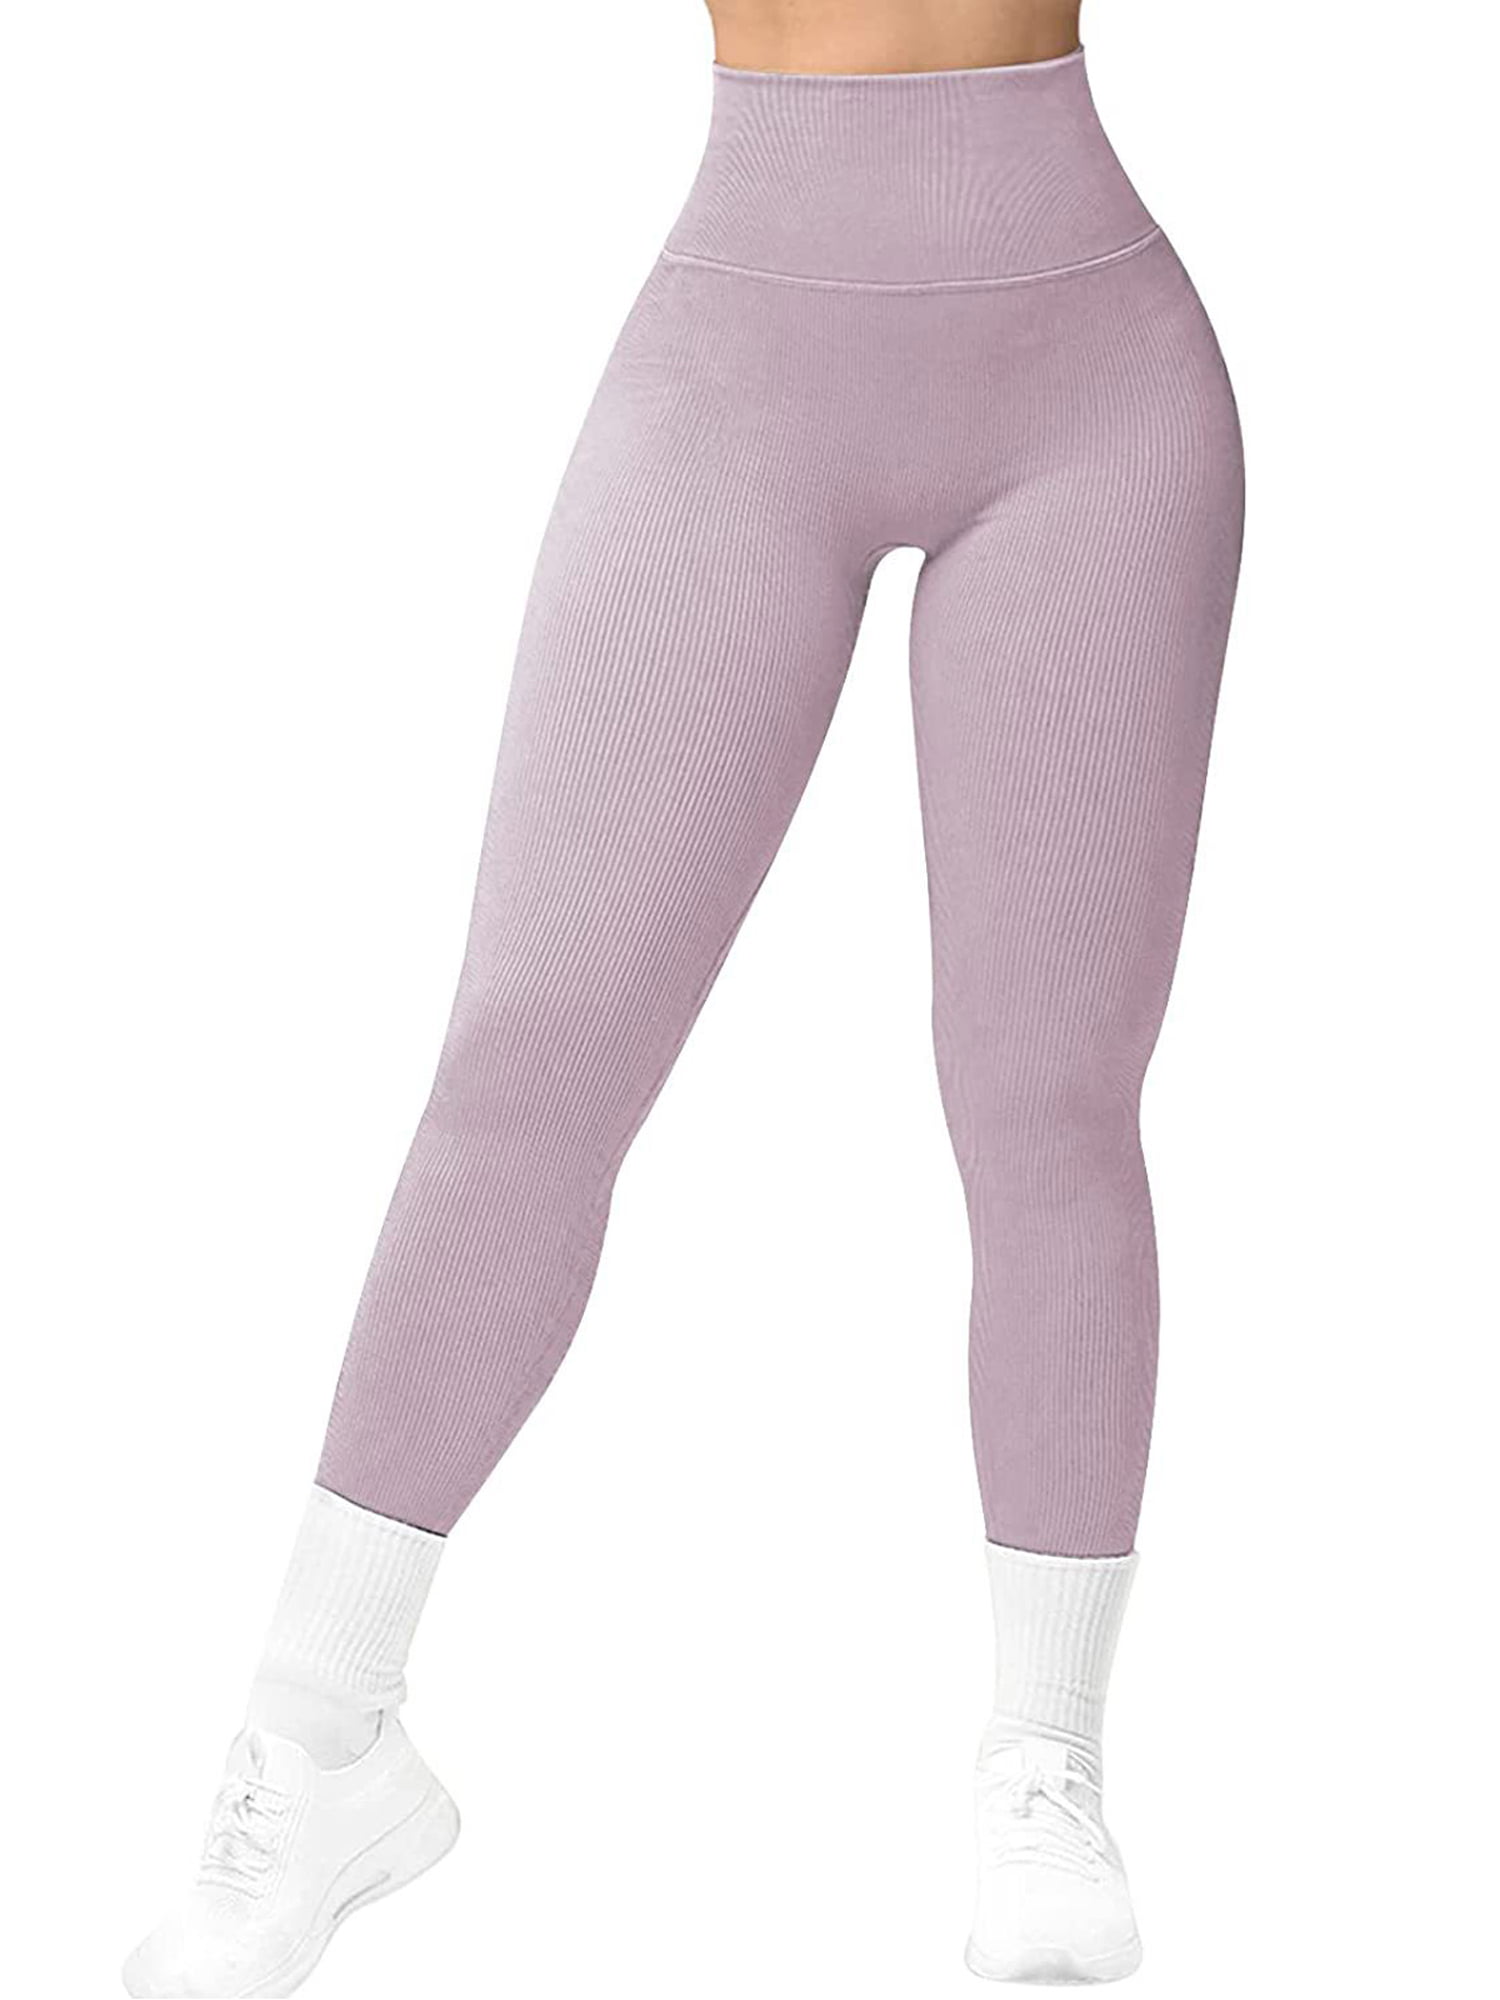 One opening Women's Bodycon Yoga Sports Leggings Solid Color